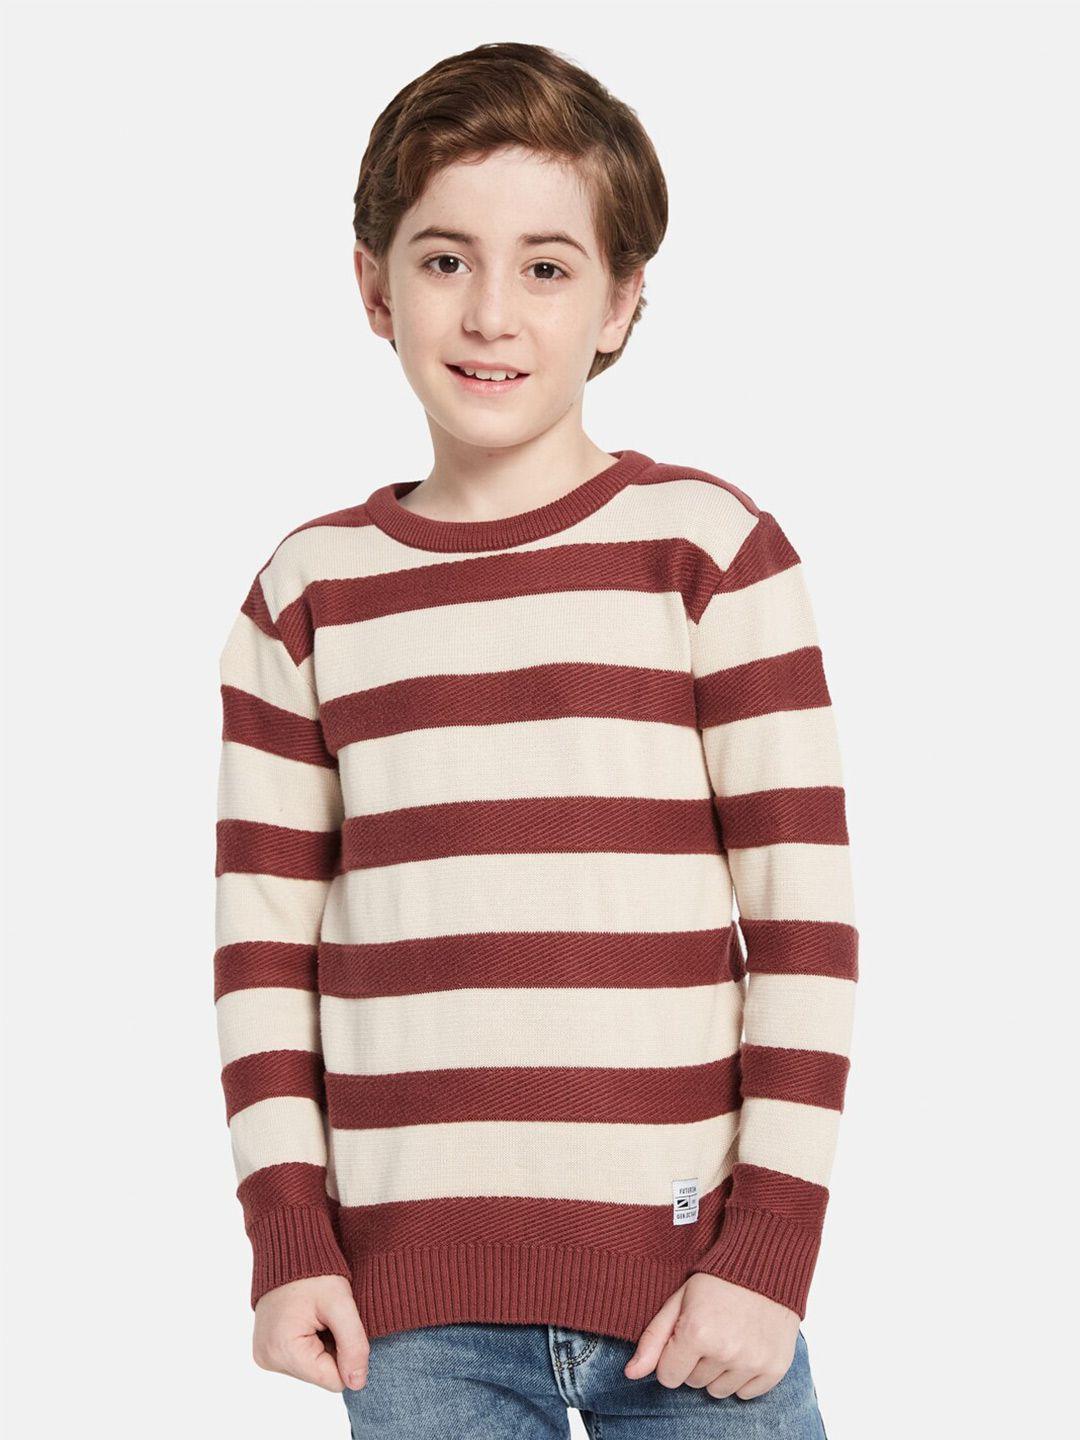 octave-boys-striped-round-neck-cotton-pullover-sweater